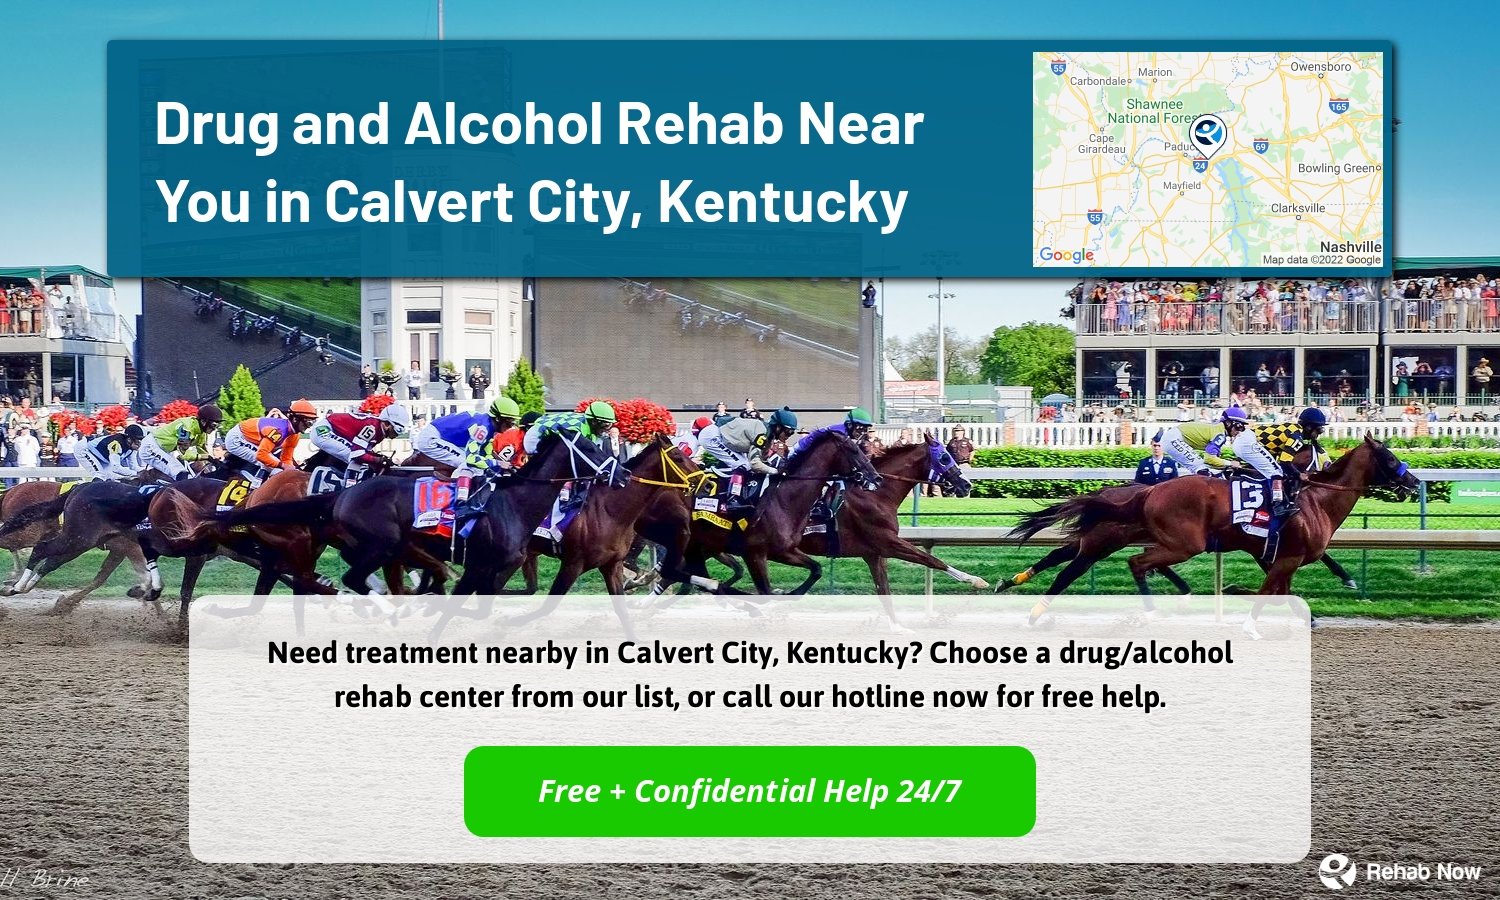 Need treatment nearby in Calvert City, Kentucky? Choose a drug/alcohol rehab center from our list, or call our hotline now for free help.